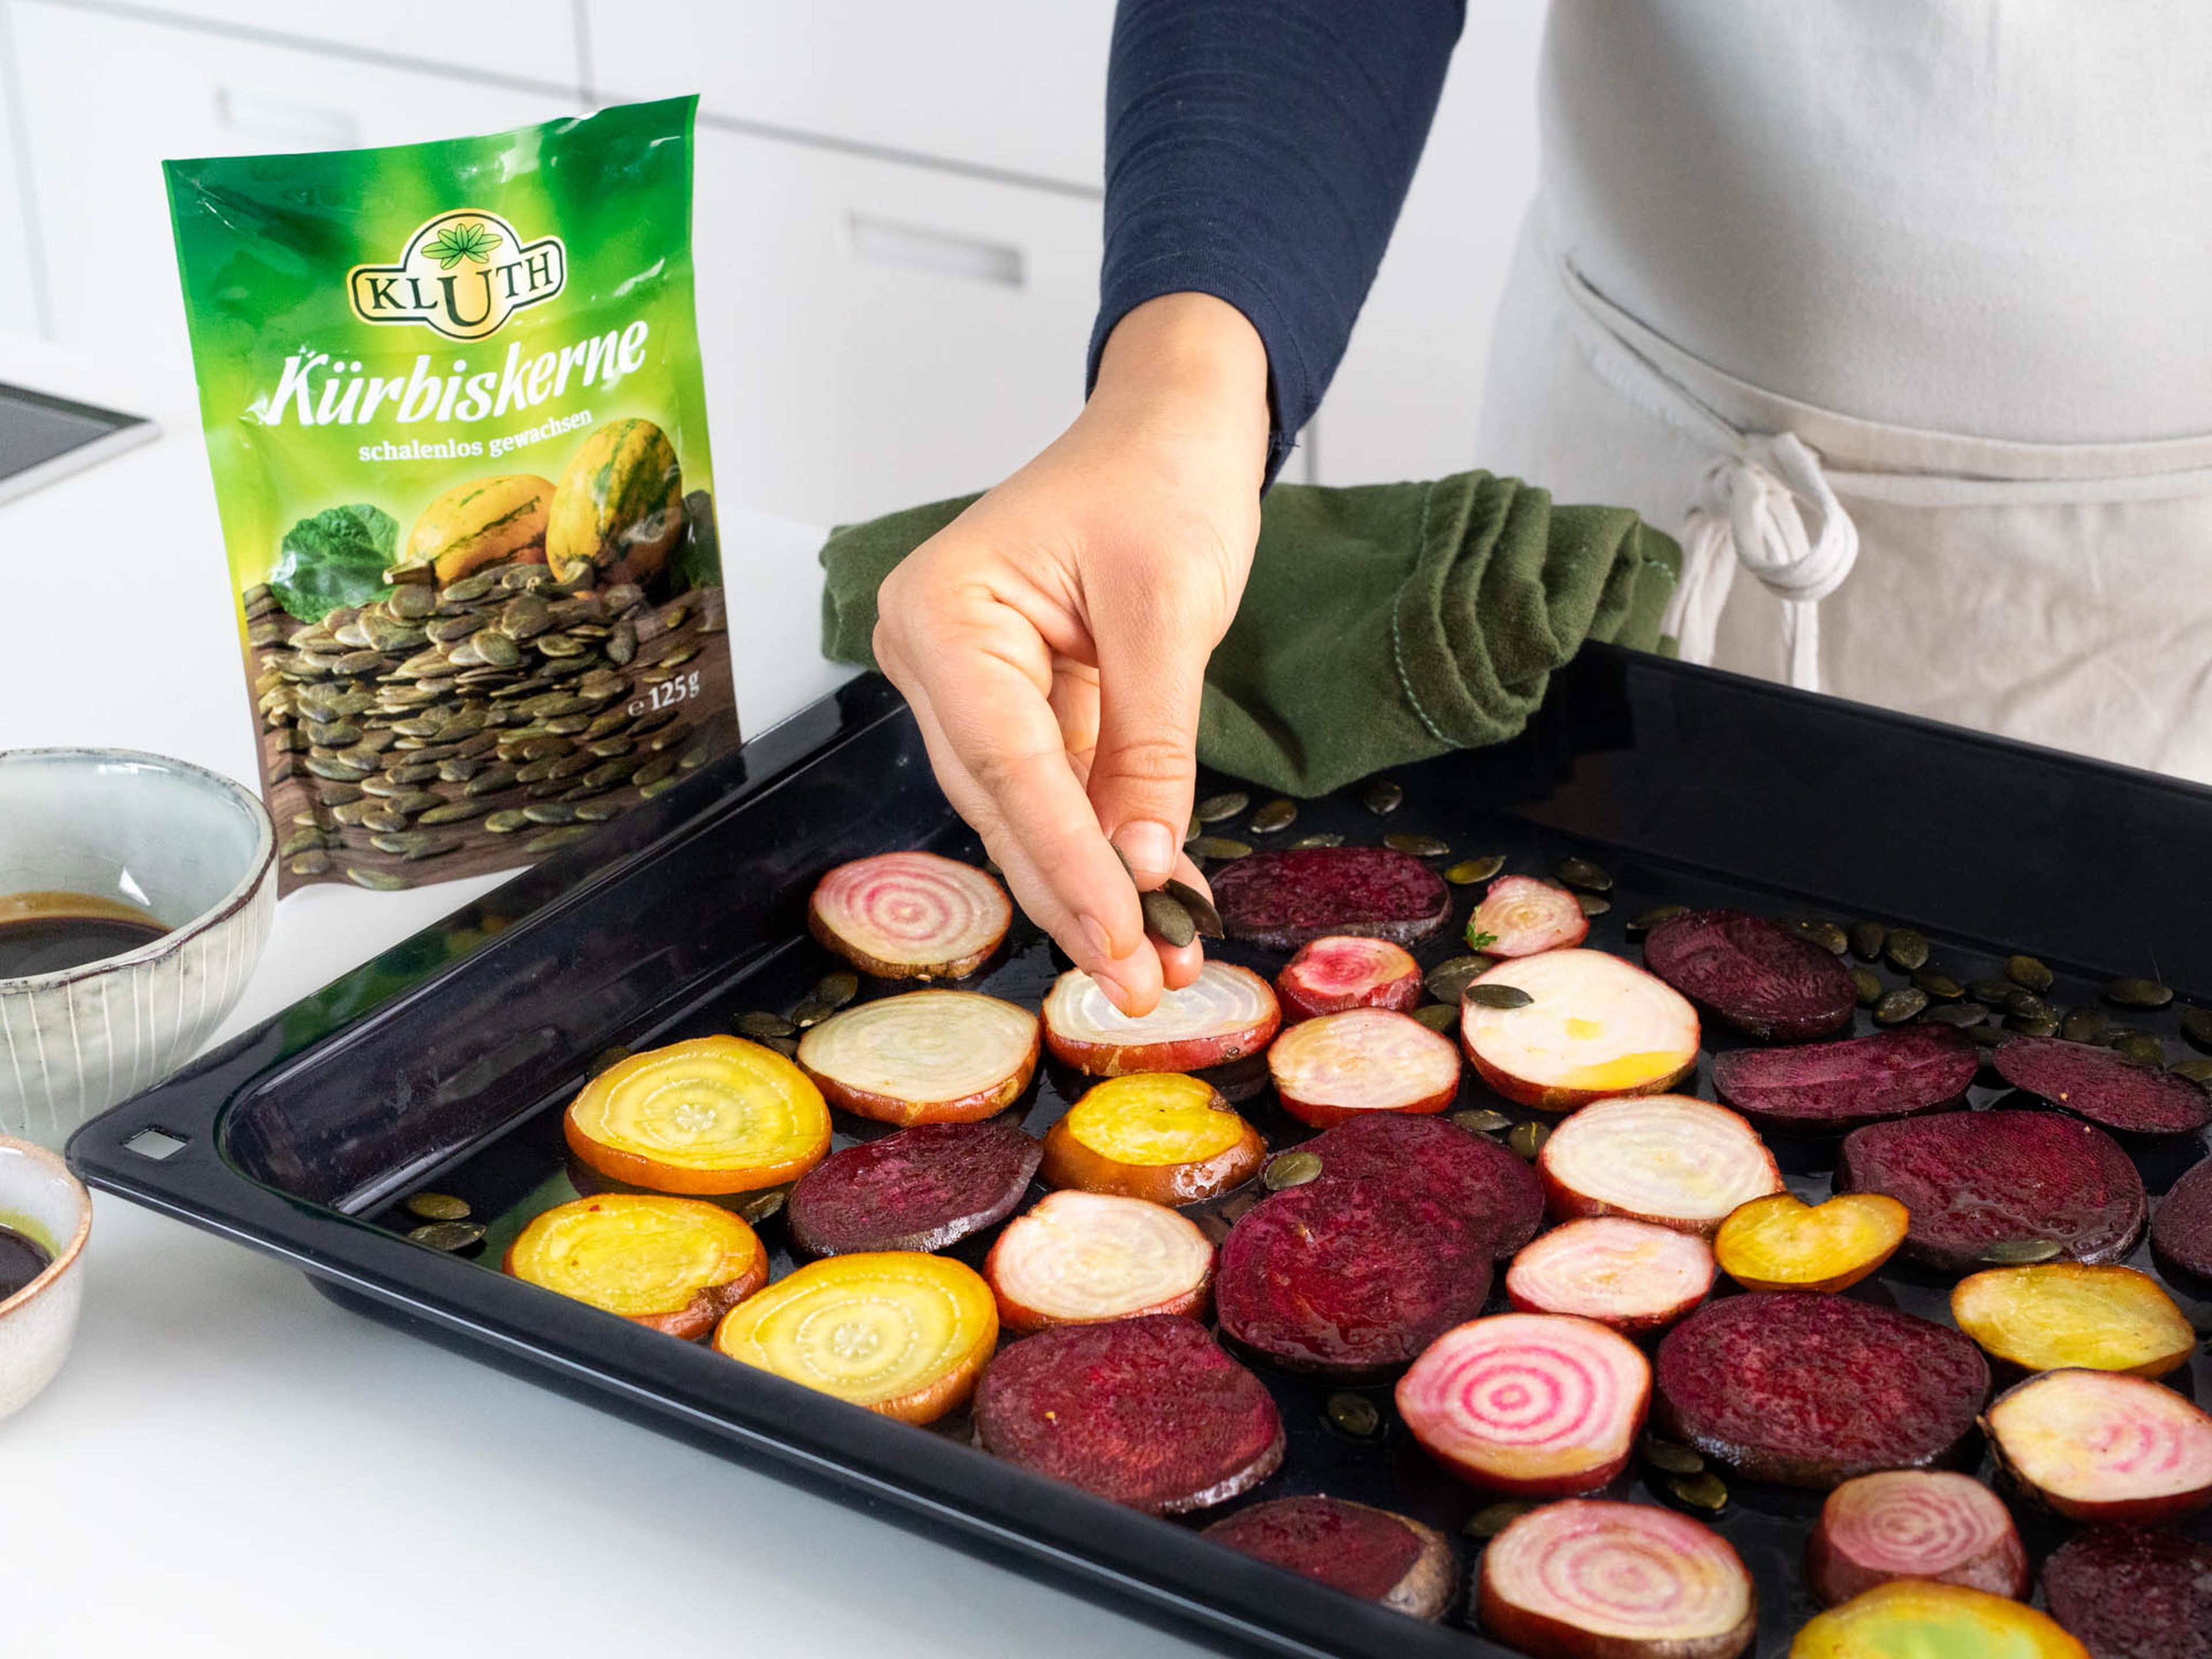 Approx. 8 min. before the end of the beet roasting time, remove the baking sheet from the oven and sprinkle with pumpkin seeds. Transfer back to the oven to finish baking.